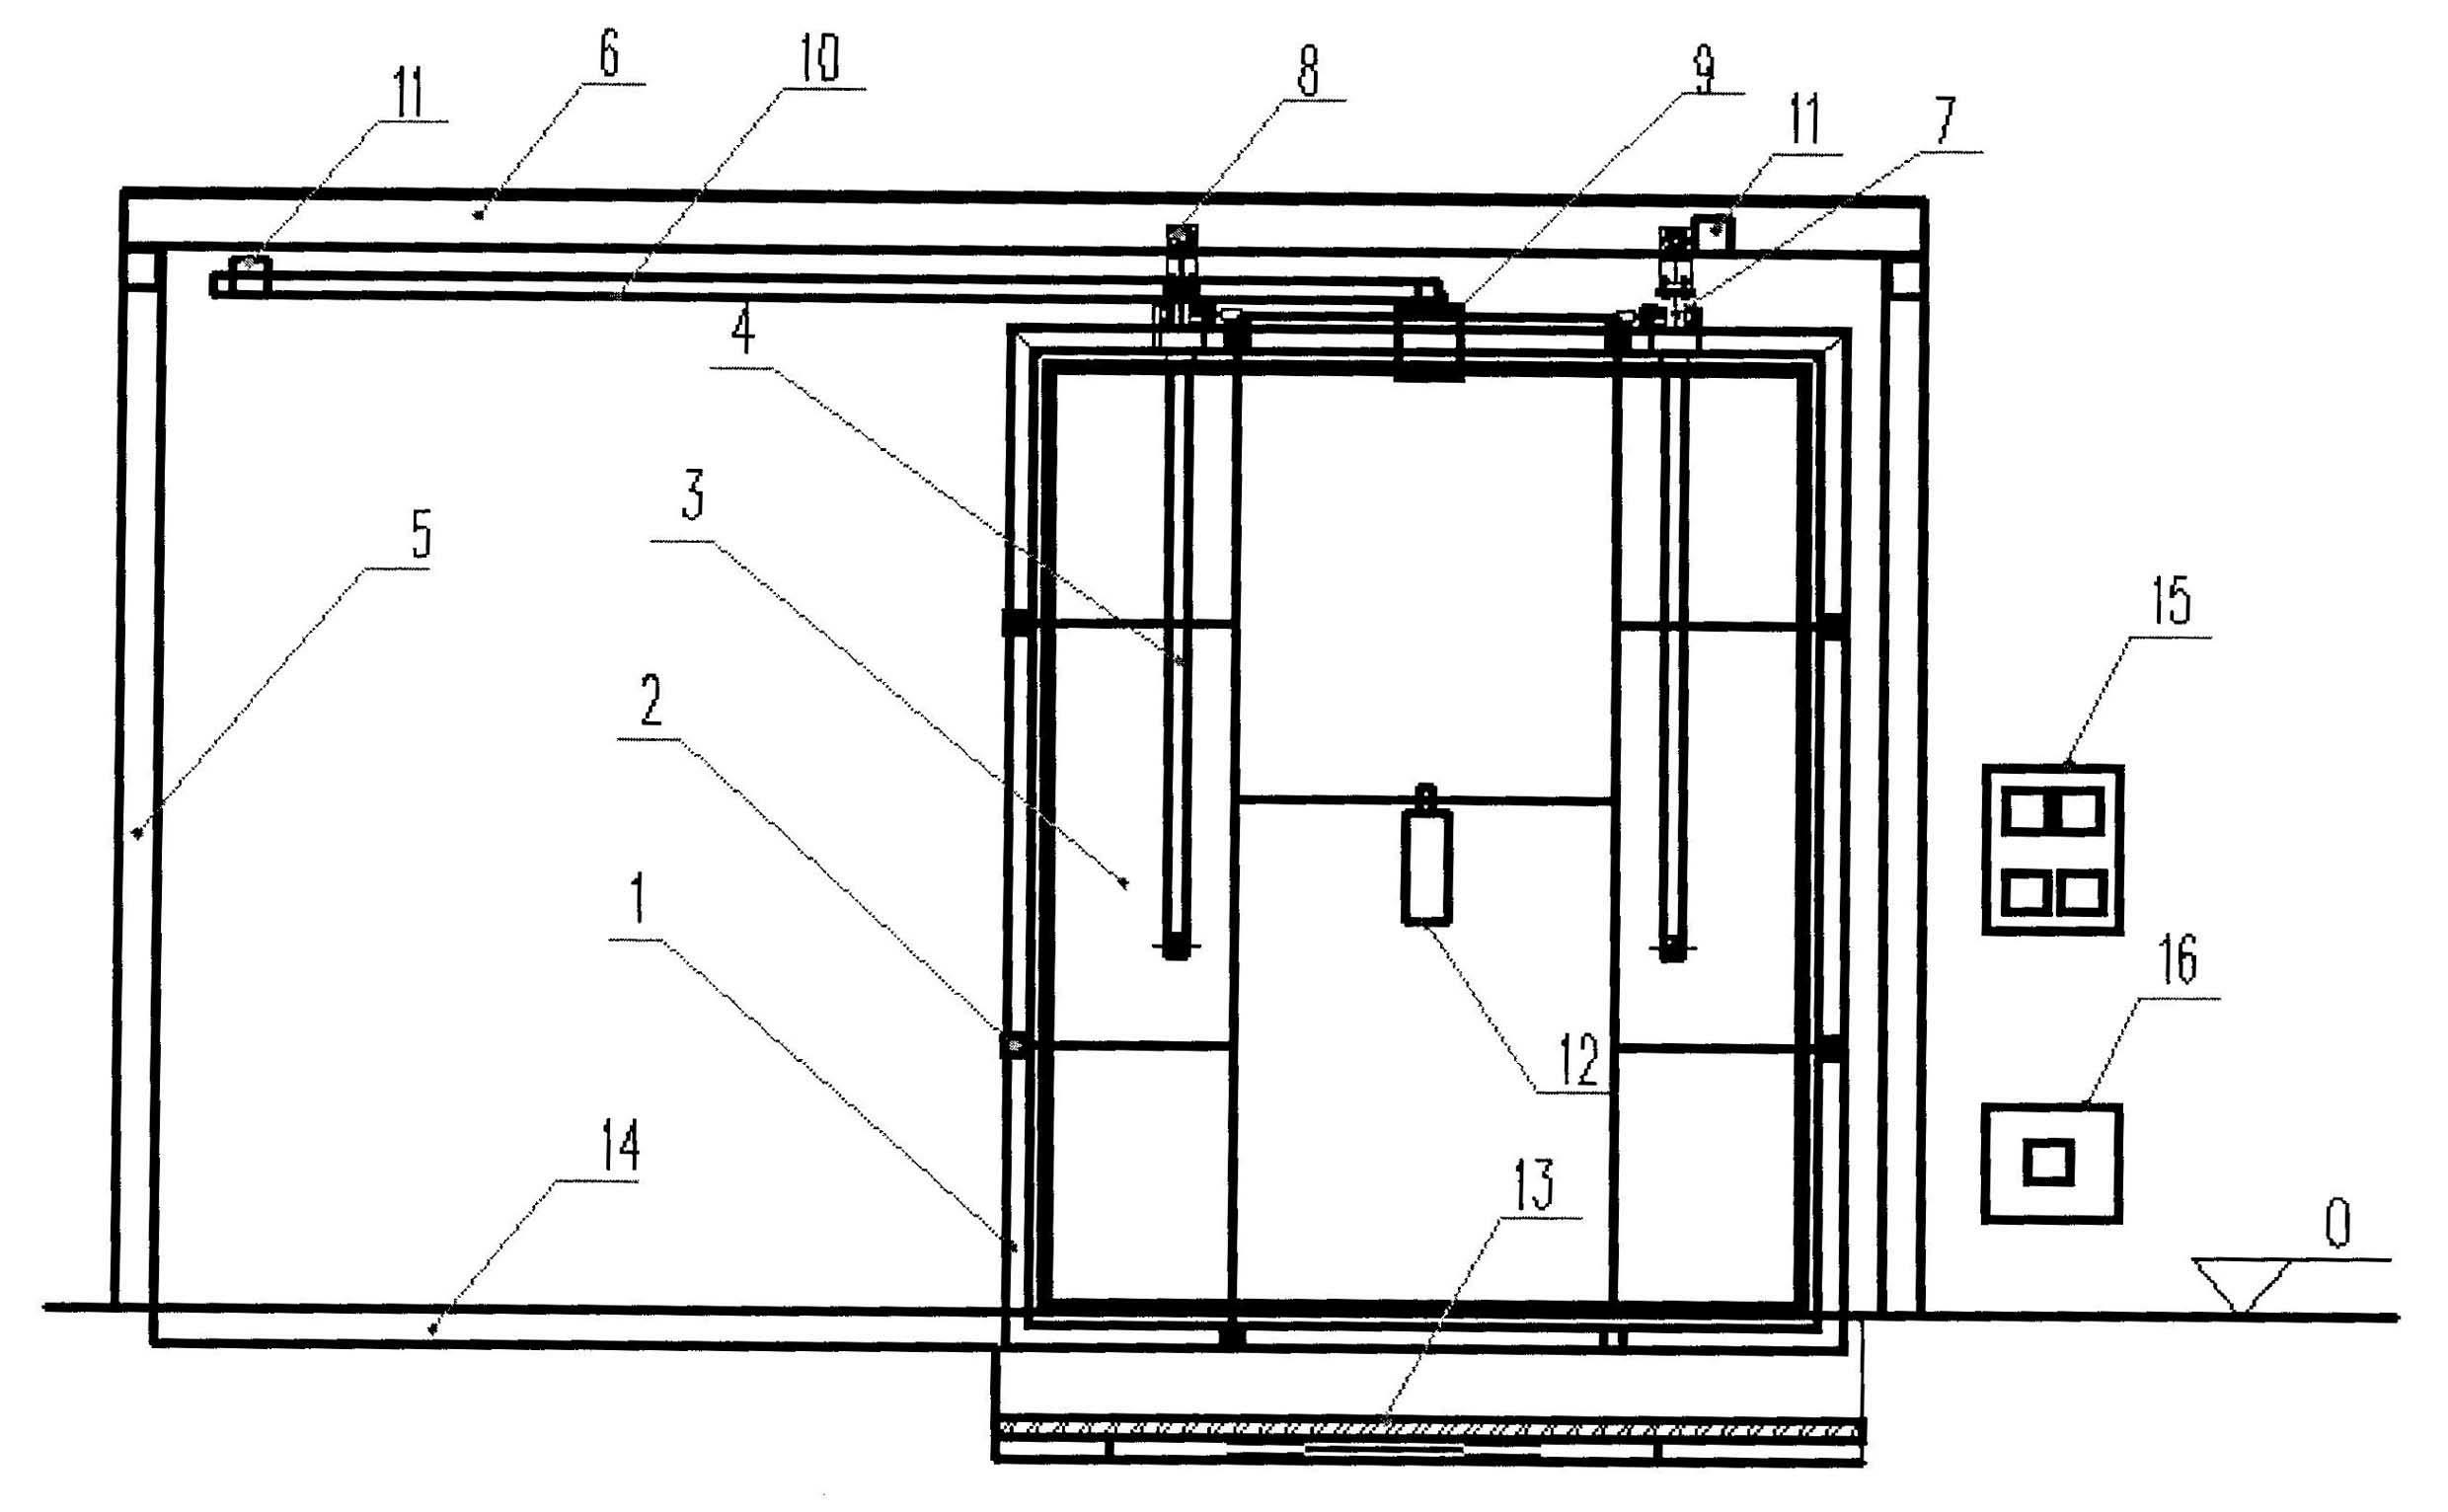 Fully-automatic suspension type two-dimensional electromagnetic shielding door with arc-shaped guide rails